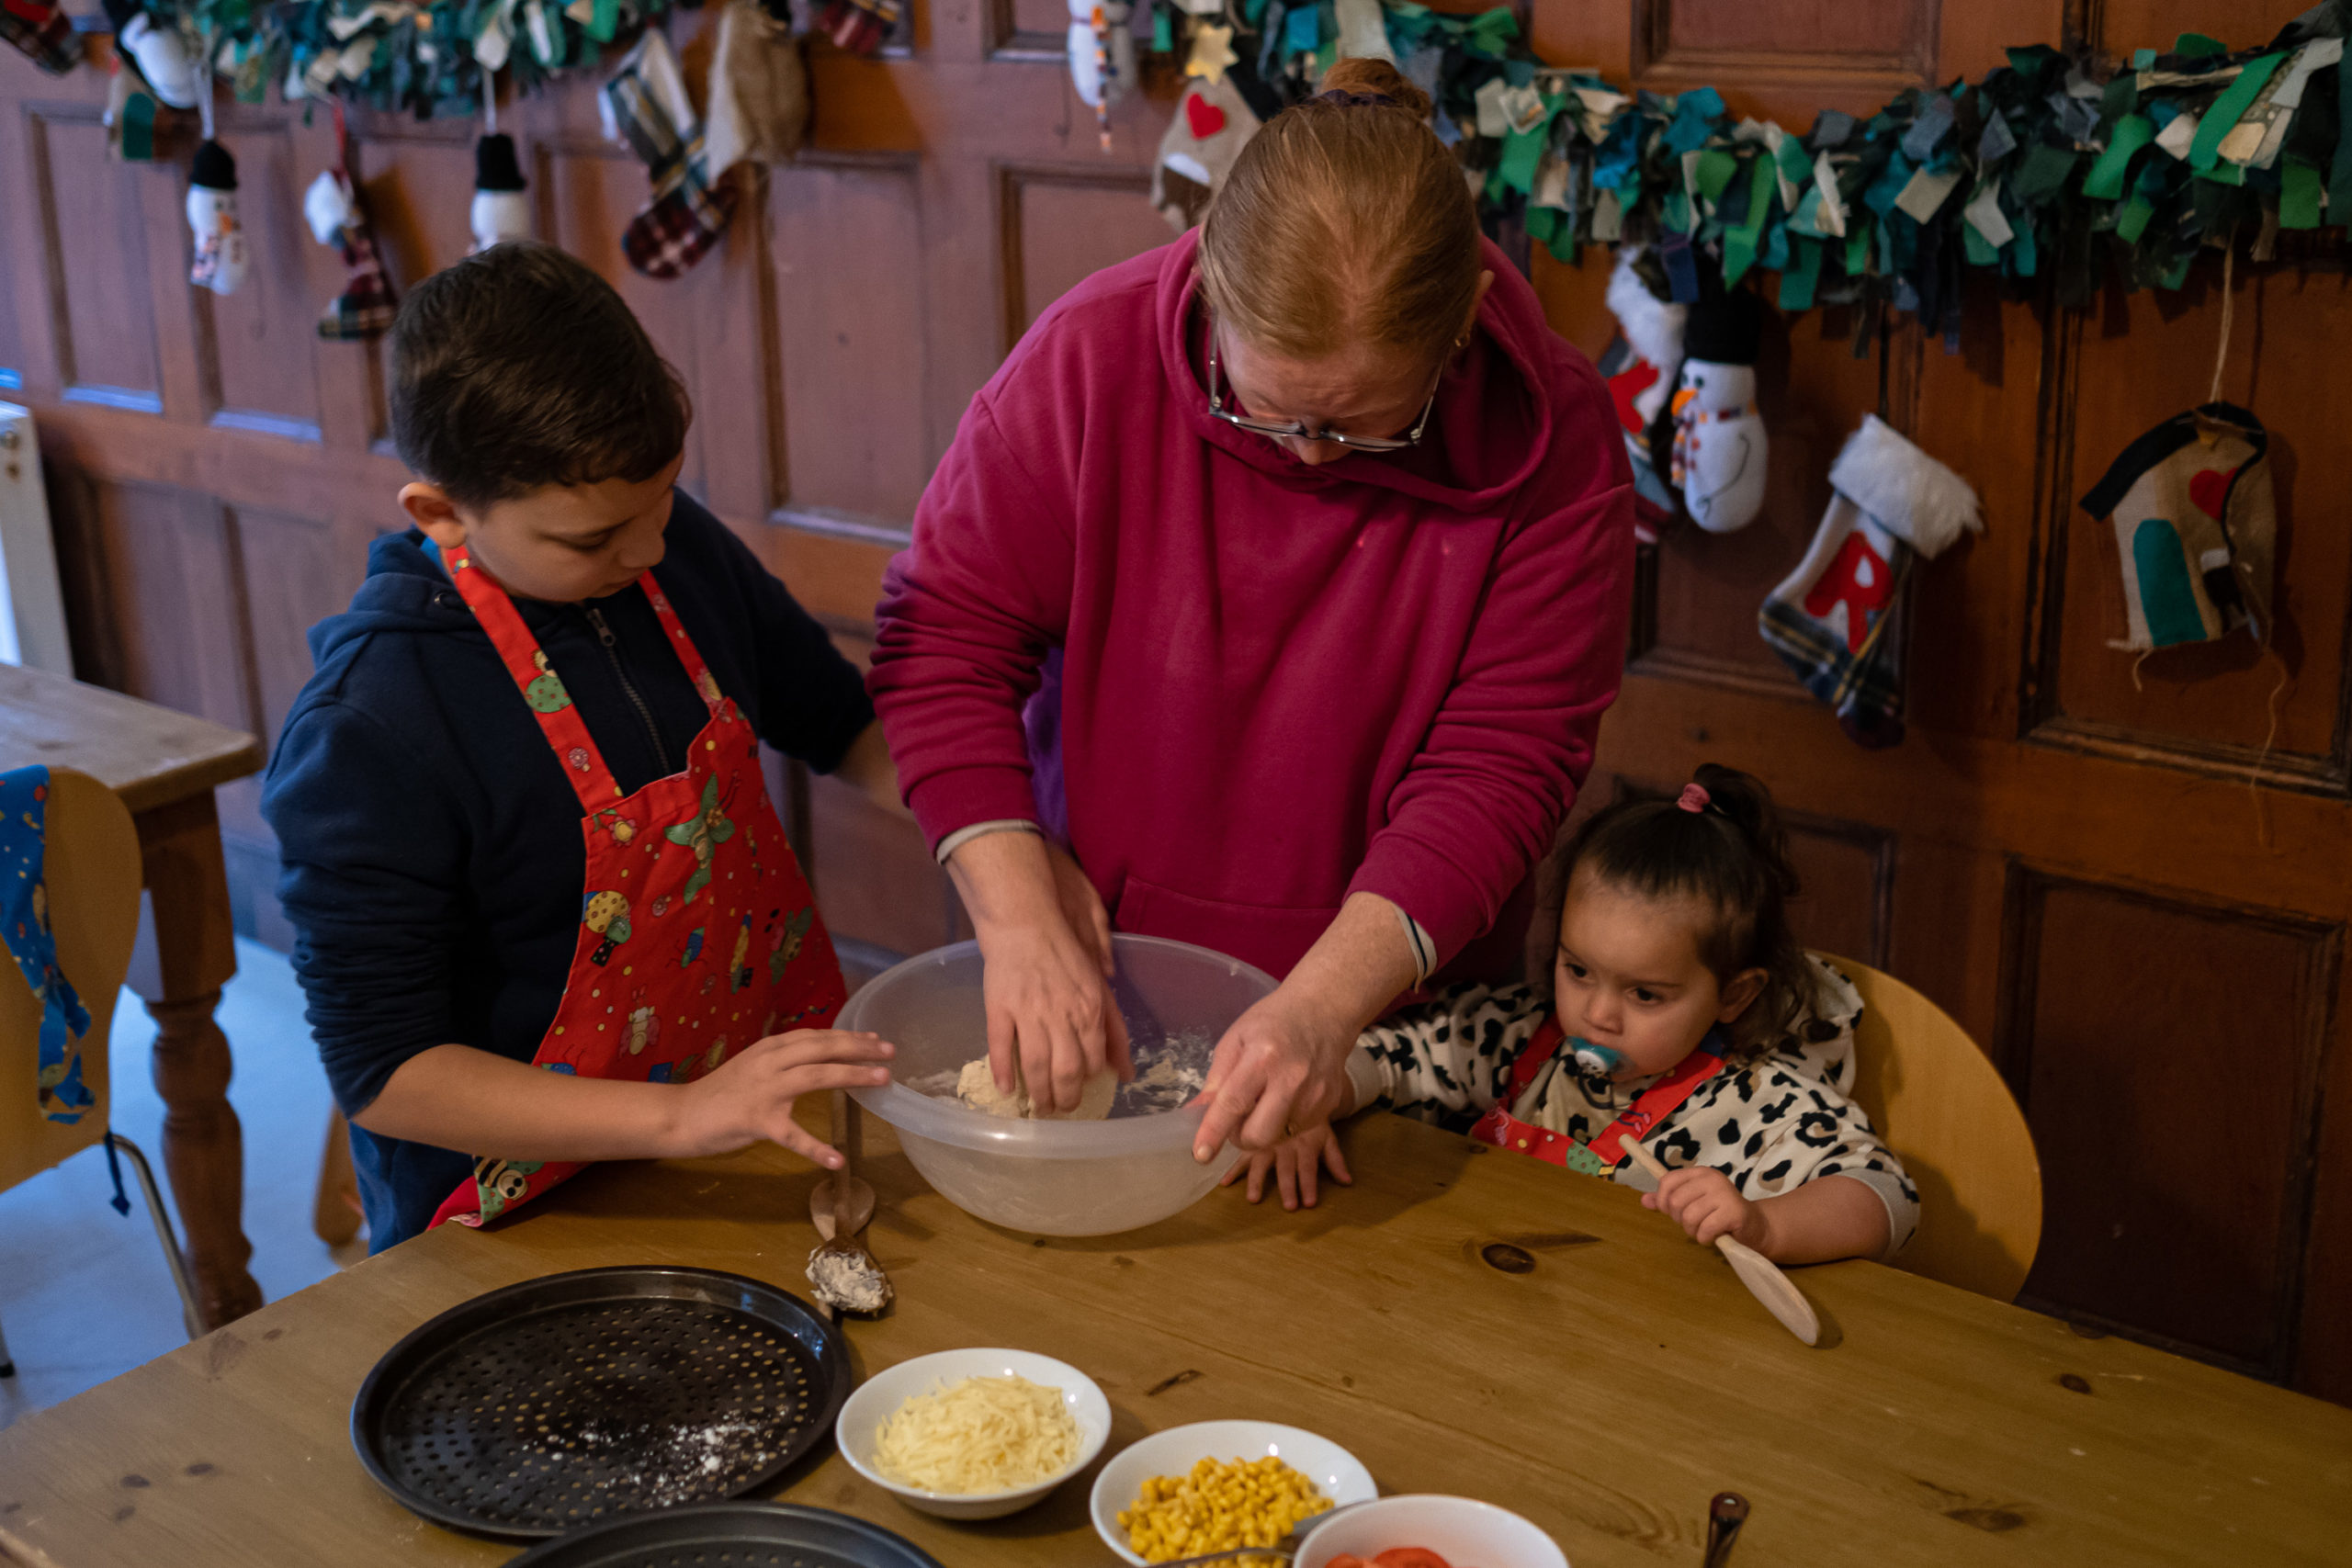 Tammy, a mother, is participating in a cooking activity with her two children. They are mixing flour into a bowl.